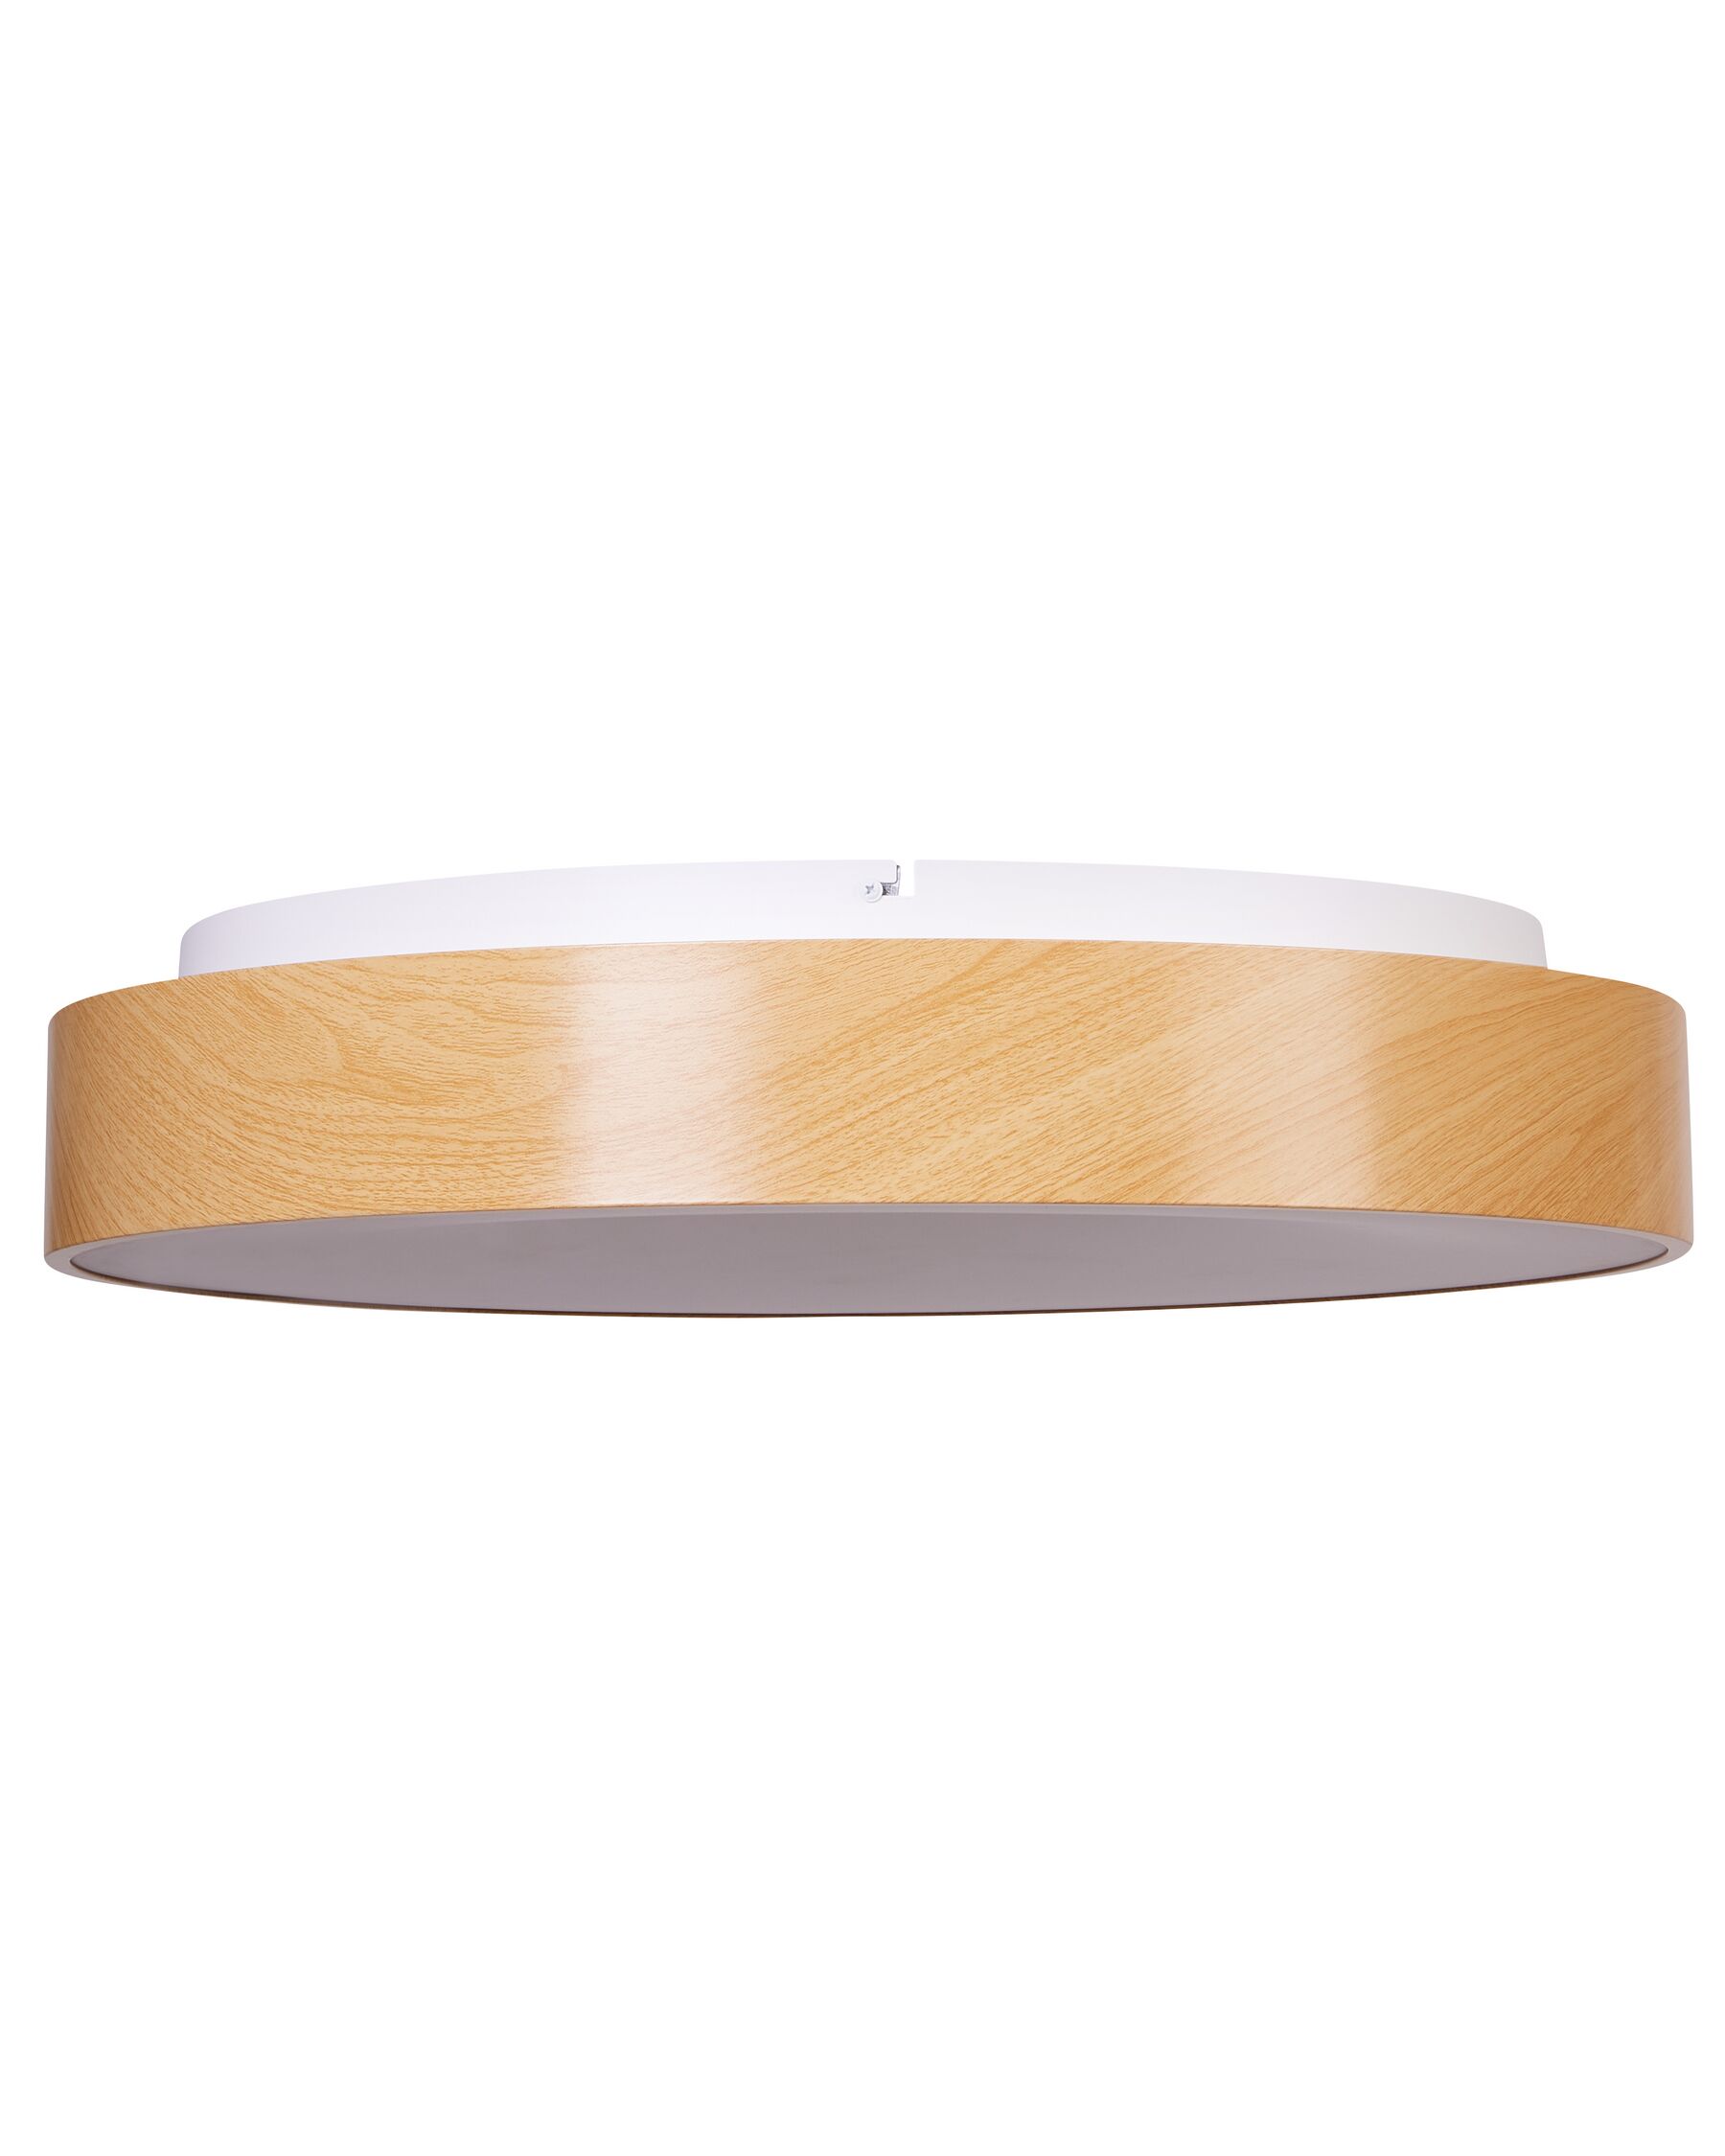 Metal LED Ceiling Lamp with Dimmer Light Wood BRAGOTO_919194